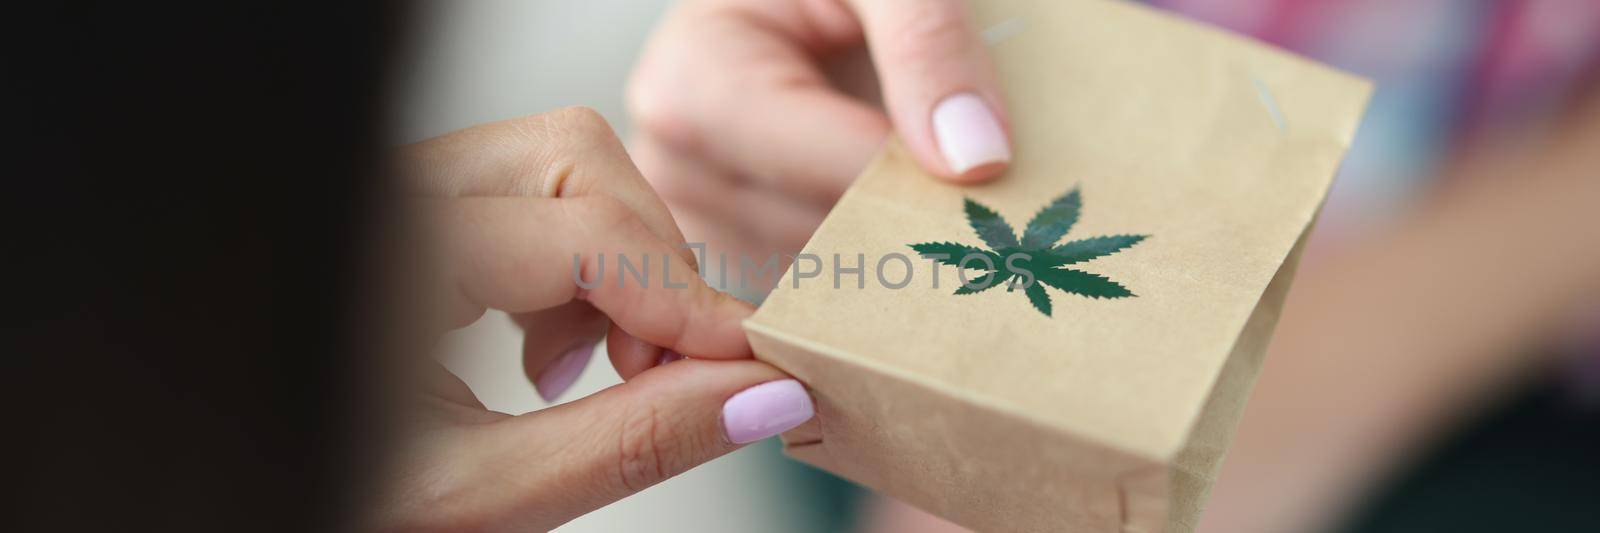 Parcel with green leaf symbol by kuprevich